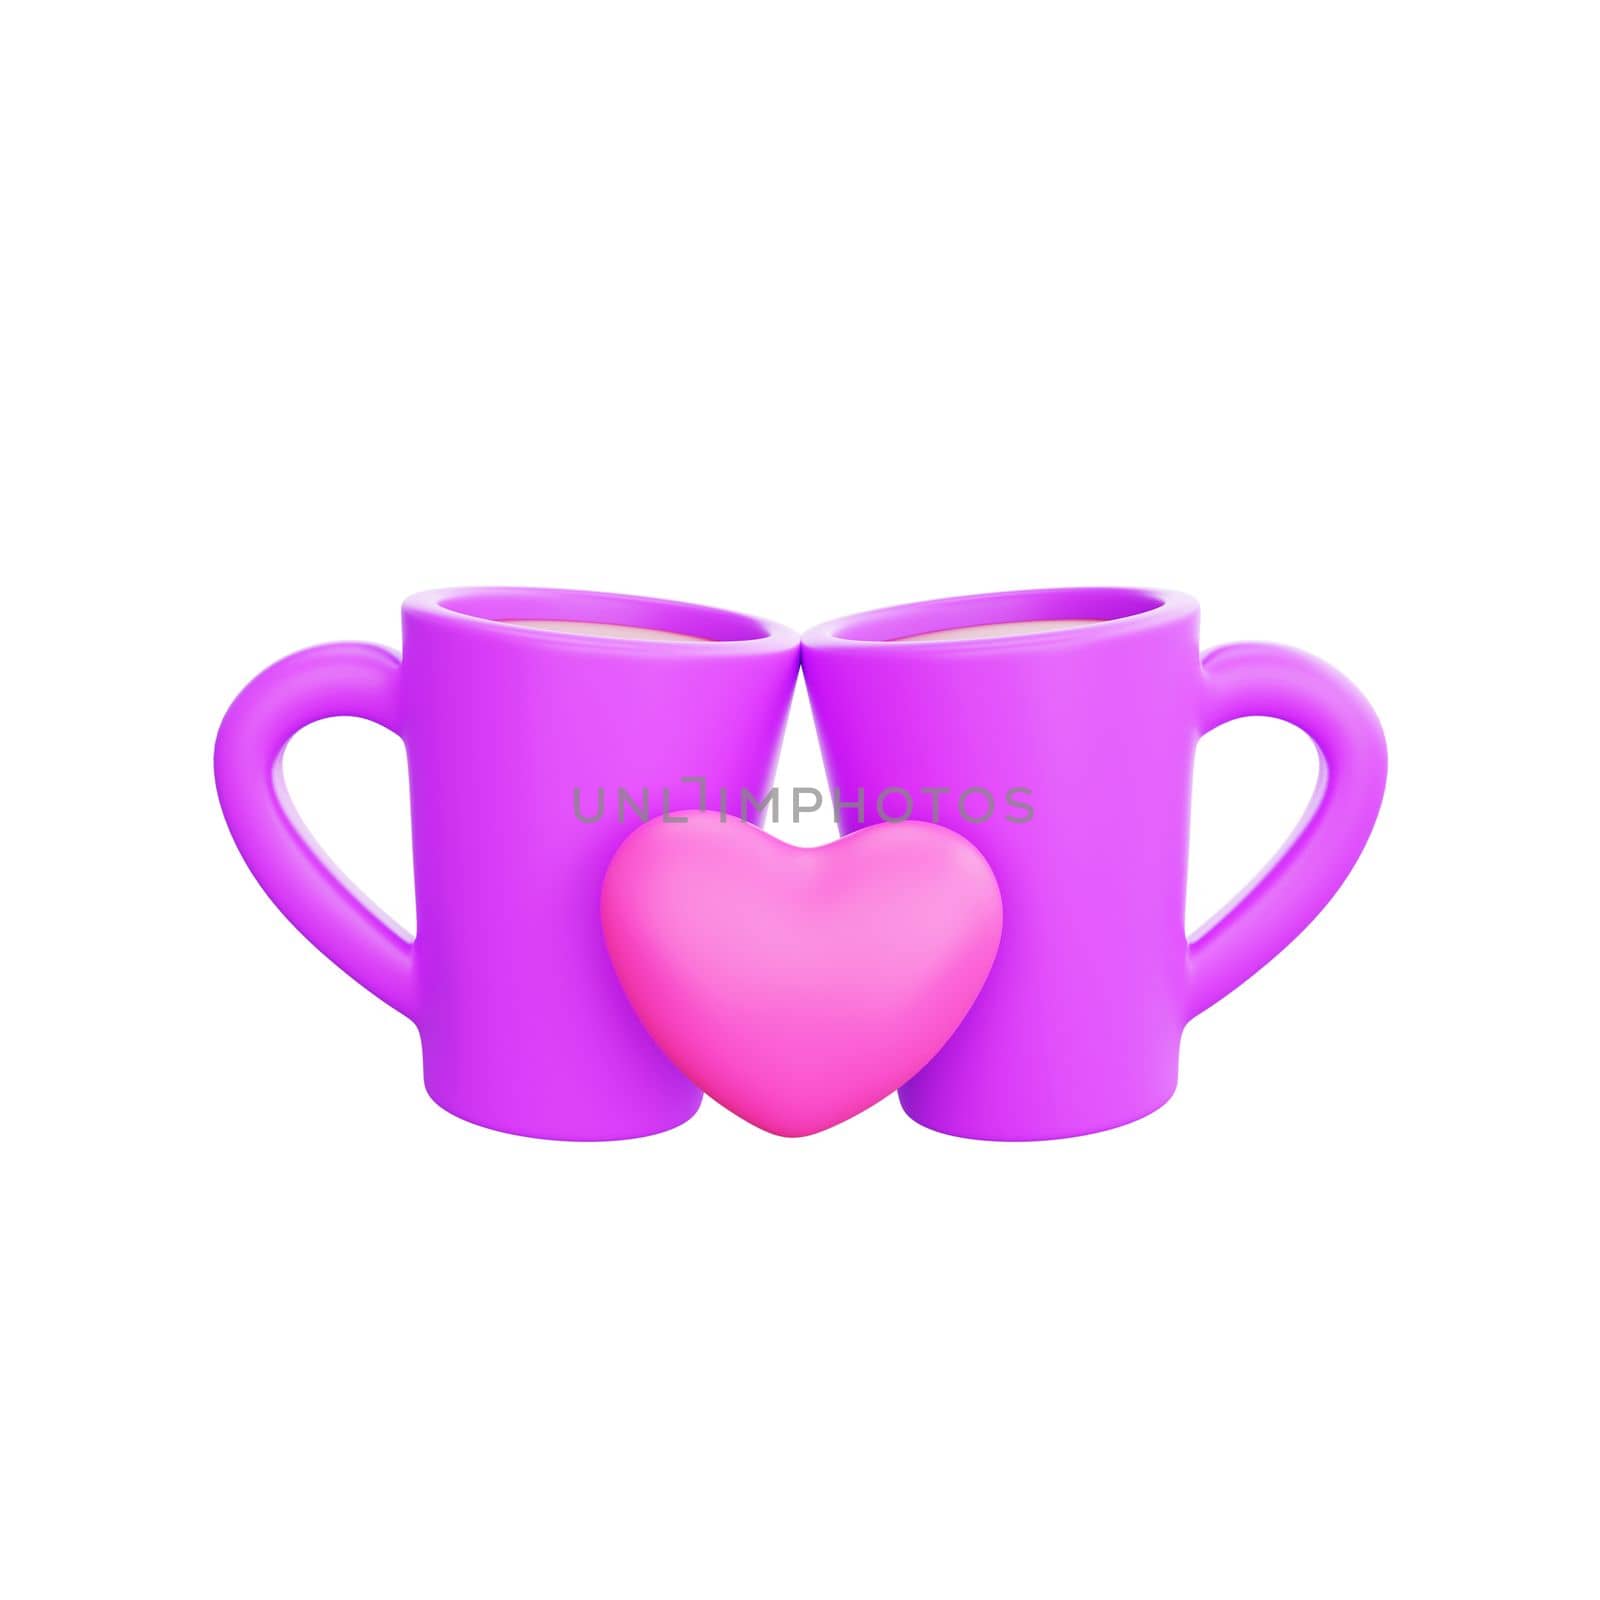 3d rendering valentine's day glass heart icon